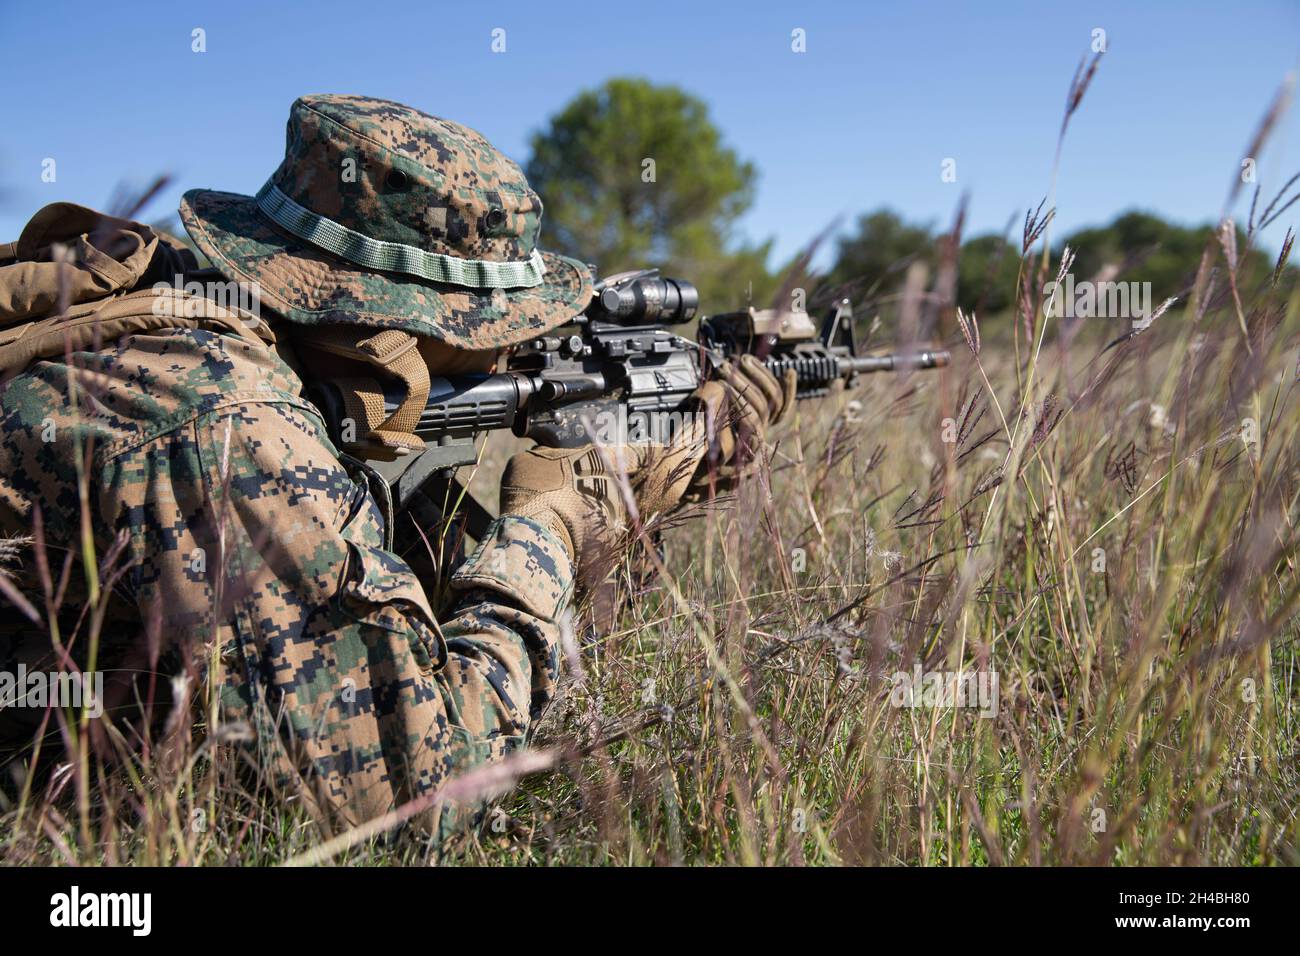 A U.S. Marine with 2d Marine Division (2d MARDIV) provides security during Exercise Baccarat near Caserne Colonel de Chabrières Nîmes, France, Oct. 13, 2021. Exercise Baccarat is a three-week joint exercise between 2d MARDIV and the French Foreign Legion that challenges forces with physical and tactical training, as well as provides the opportunity to exchange knowledge that assists in developing and strengthening bonds. (U.S. Marine Corps photo by Lance Cpl. Jennifer E. Reyes) Stock Photo